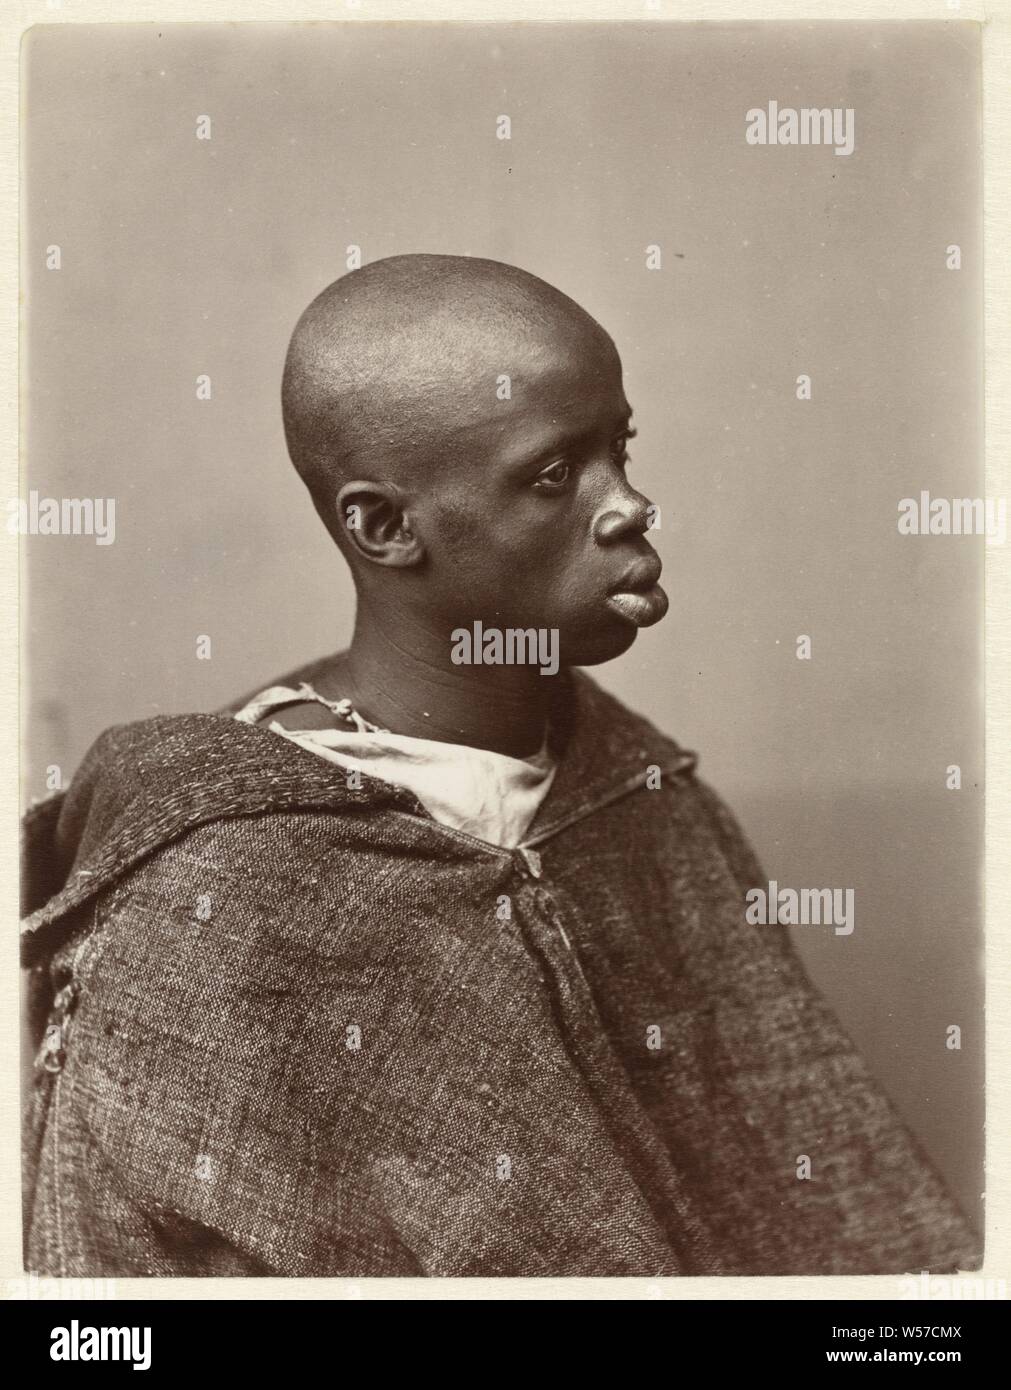 Portraits of Hamido Laâmbre Portrait of Hamido Laâmbre, Rotated three quarters., Child, child playing with animals, Antonio Cavilla, Noord-Afrika, c. 1884, paper, photographic paper, albumen print, h 199 mm × w 153 mm Stock Photo